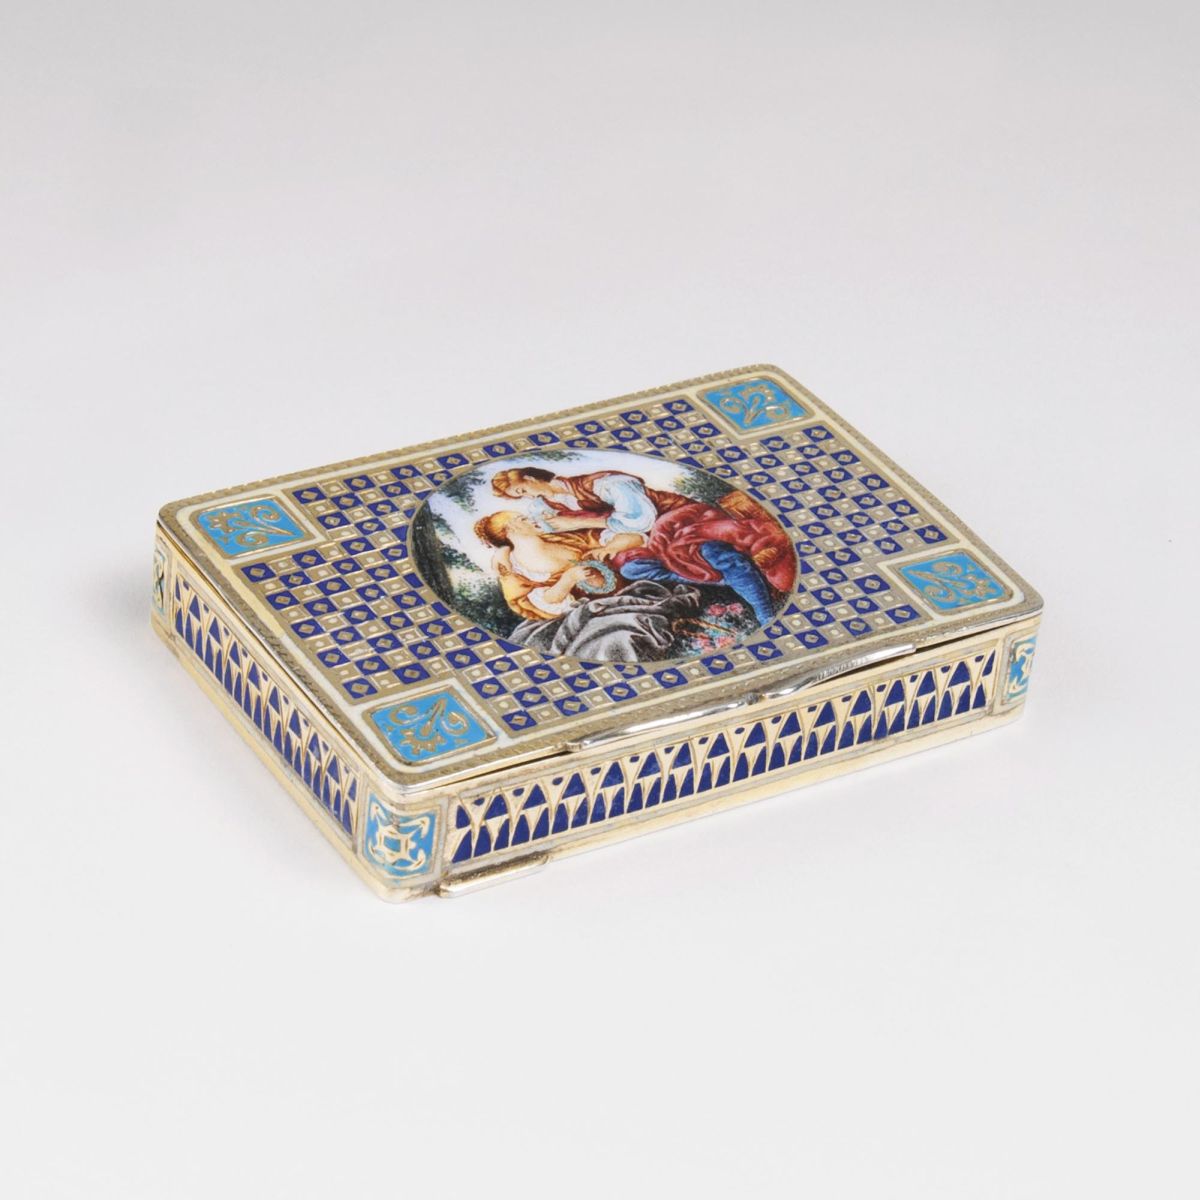 A Small Enamel Box with a gallant couple